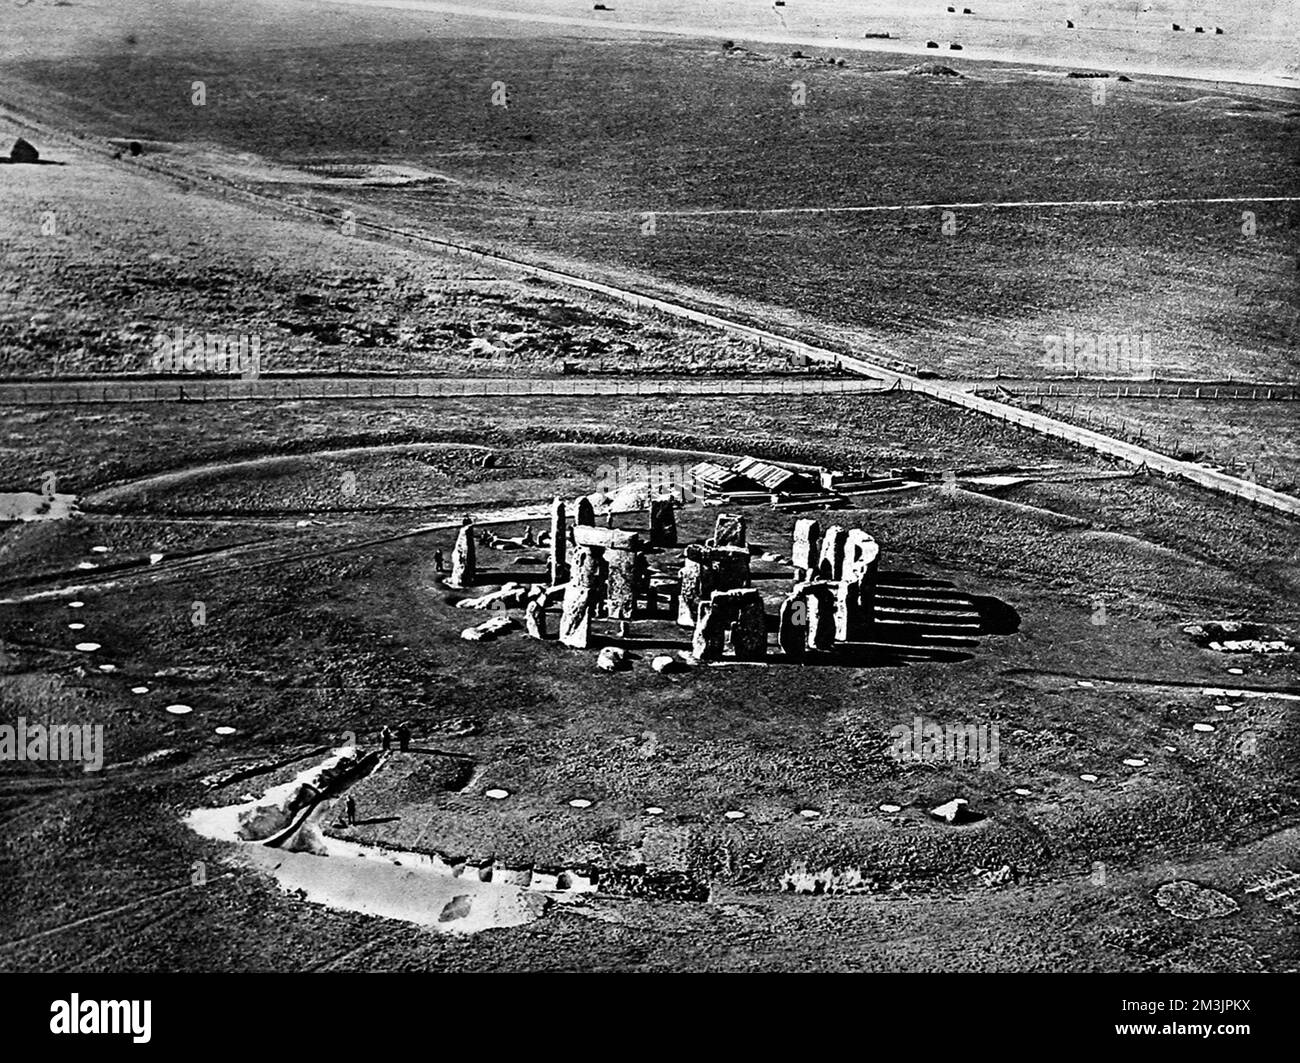 View of Stonehenge showing the excavations which were introduced after the discovery of the Aubrey Holes in 1921 (semi-circle of white patches). The holes contained cremated human remains where foreign stones once would have stood.     Date: 15th April 1922 Stock Photo